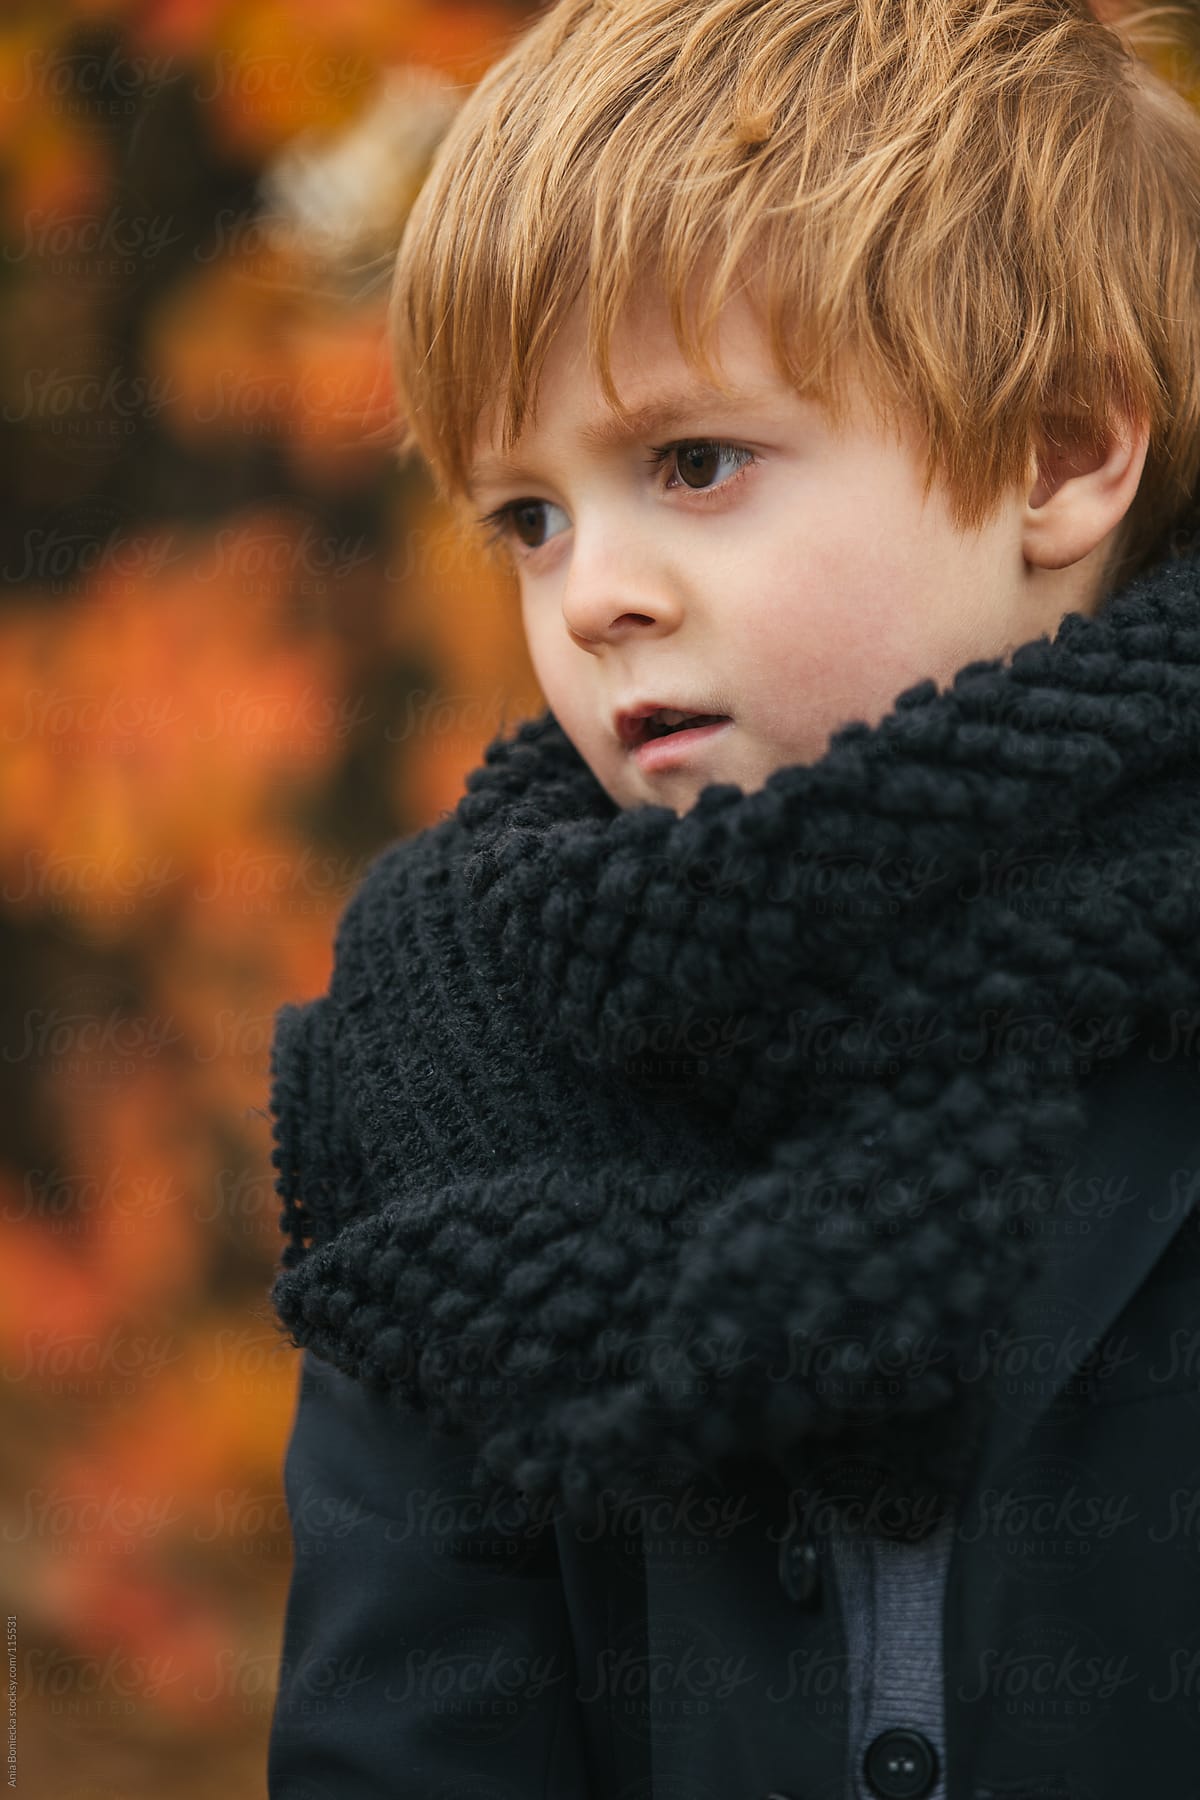 A portrait of a young boy in a big scarf looking away